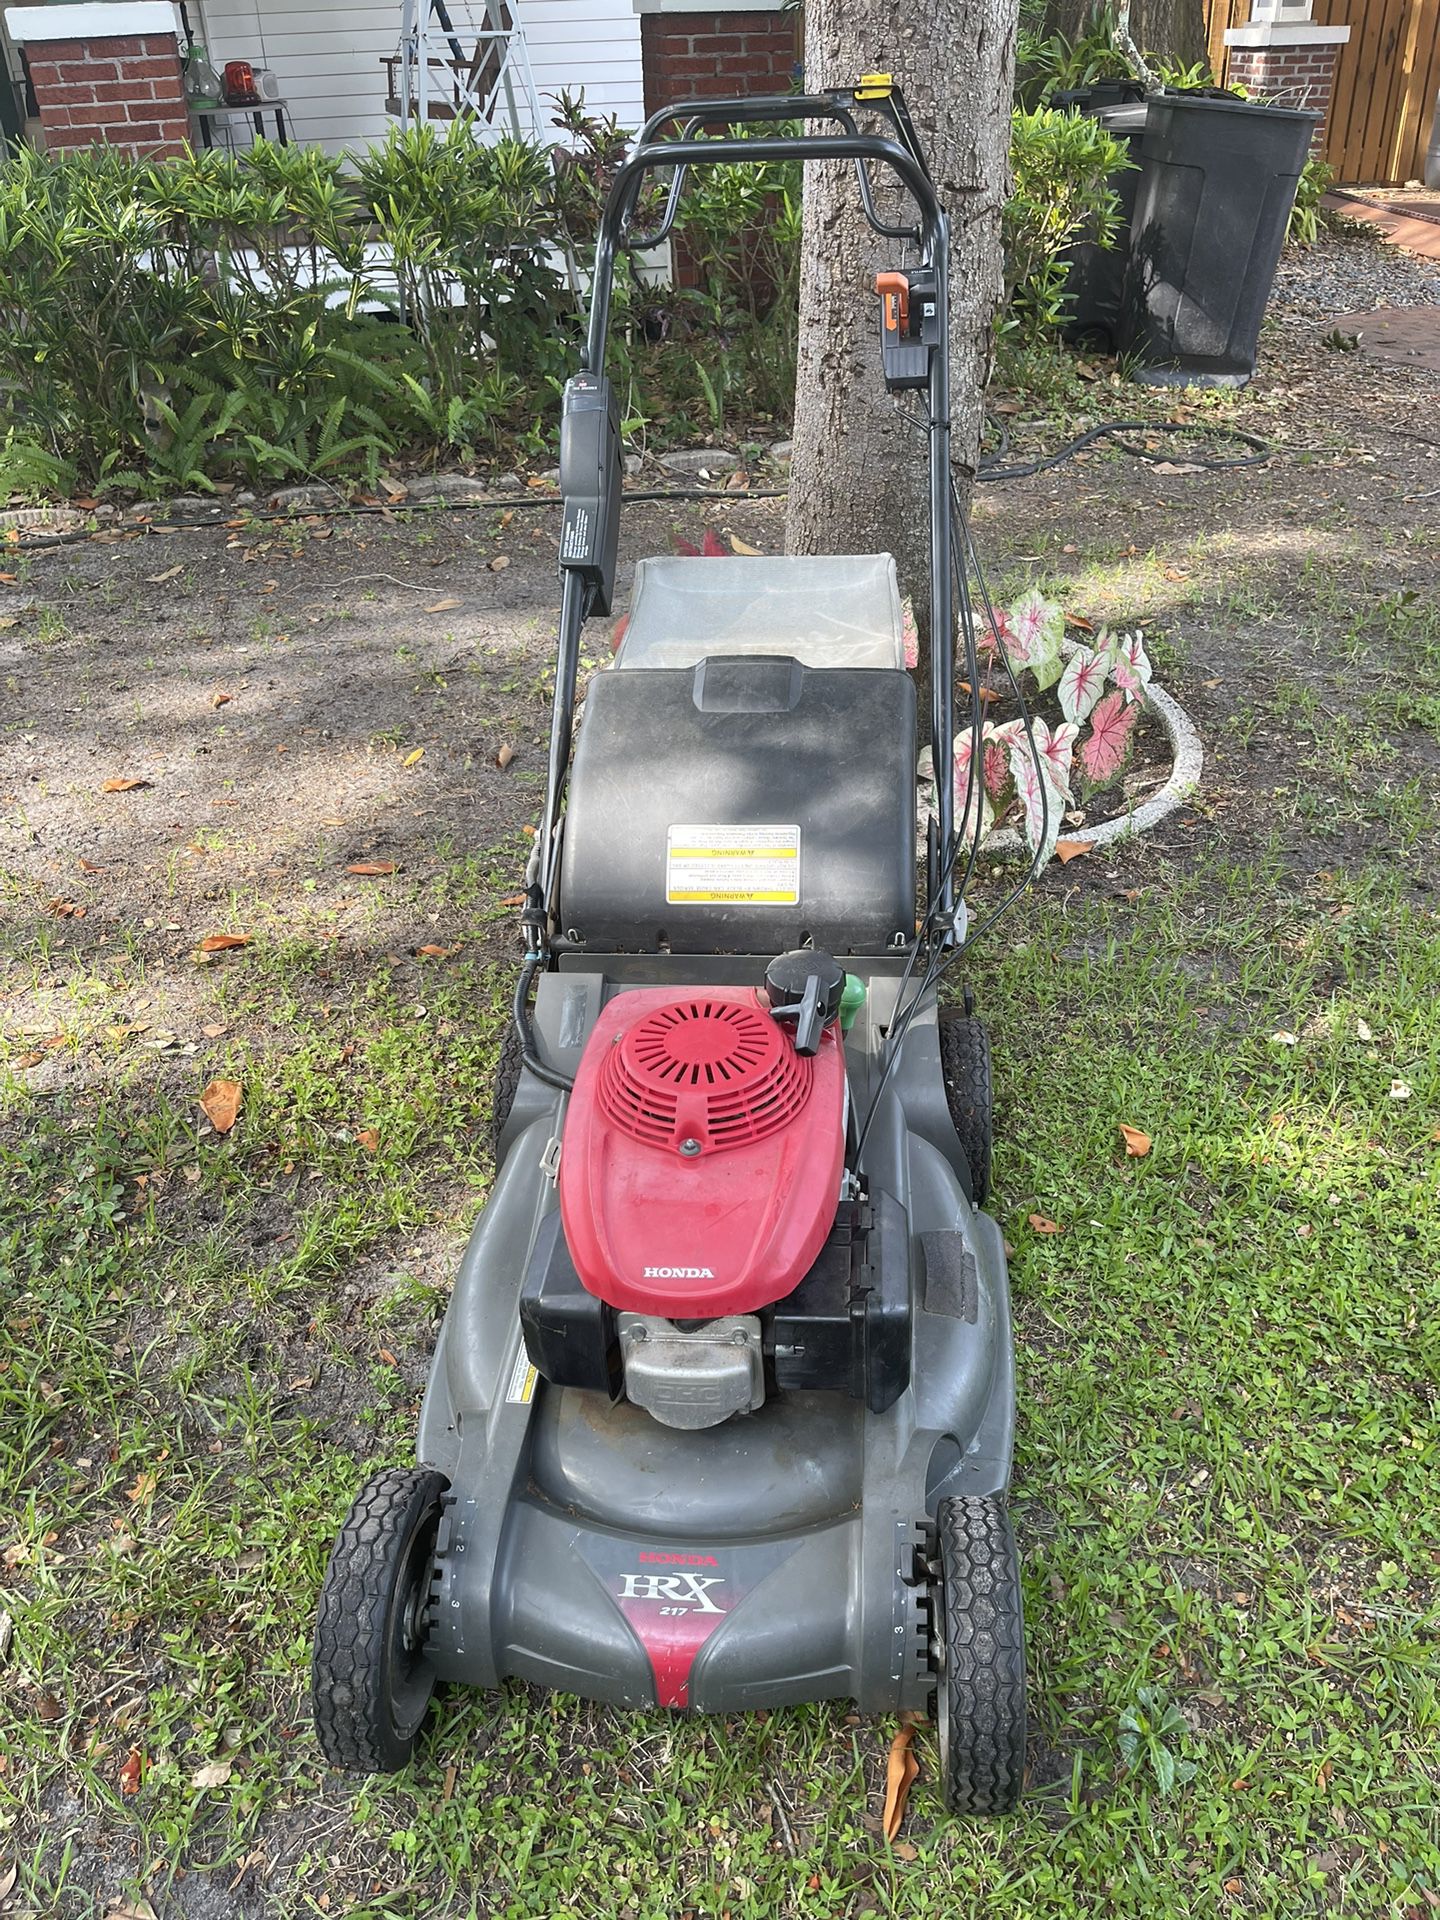 Self Propelled Honda Commercial Key Start Lawn Mower 21” Cut With Dual Blades 